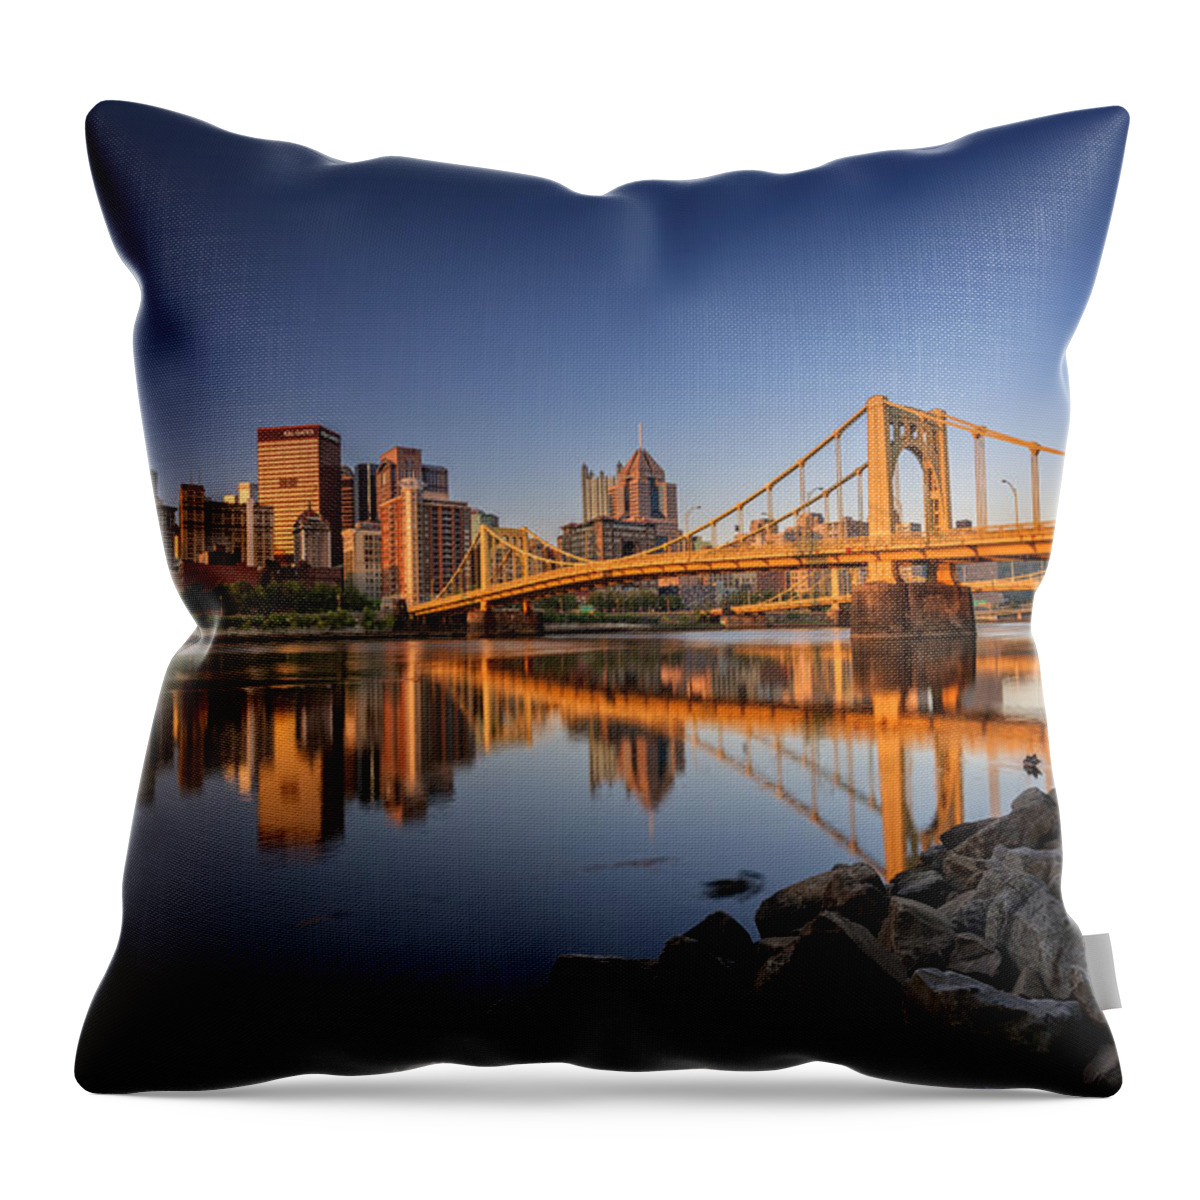 Pittsburgh Throw Pillow featuring the photograph Andy Warhol Bridge by Rick Berk